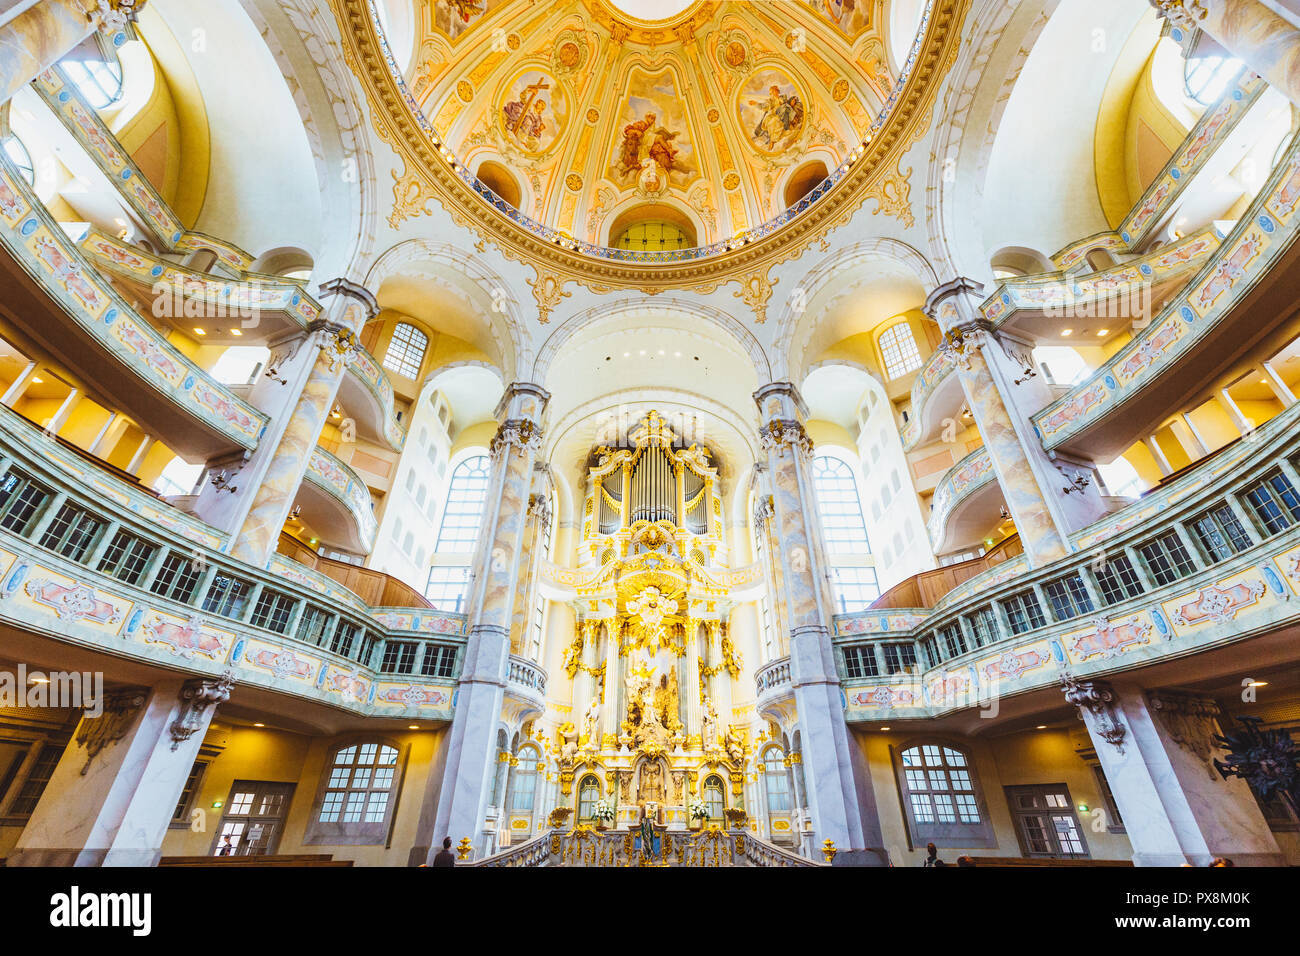 Interior wide angle view of famous Dresden Frauenkirche, Dresden, Saxony, Germany Stock Photo